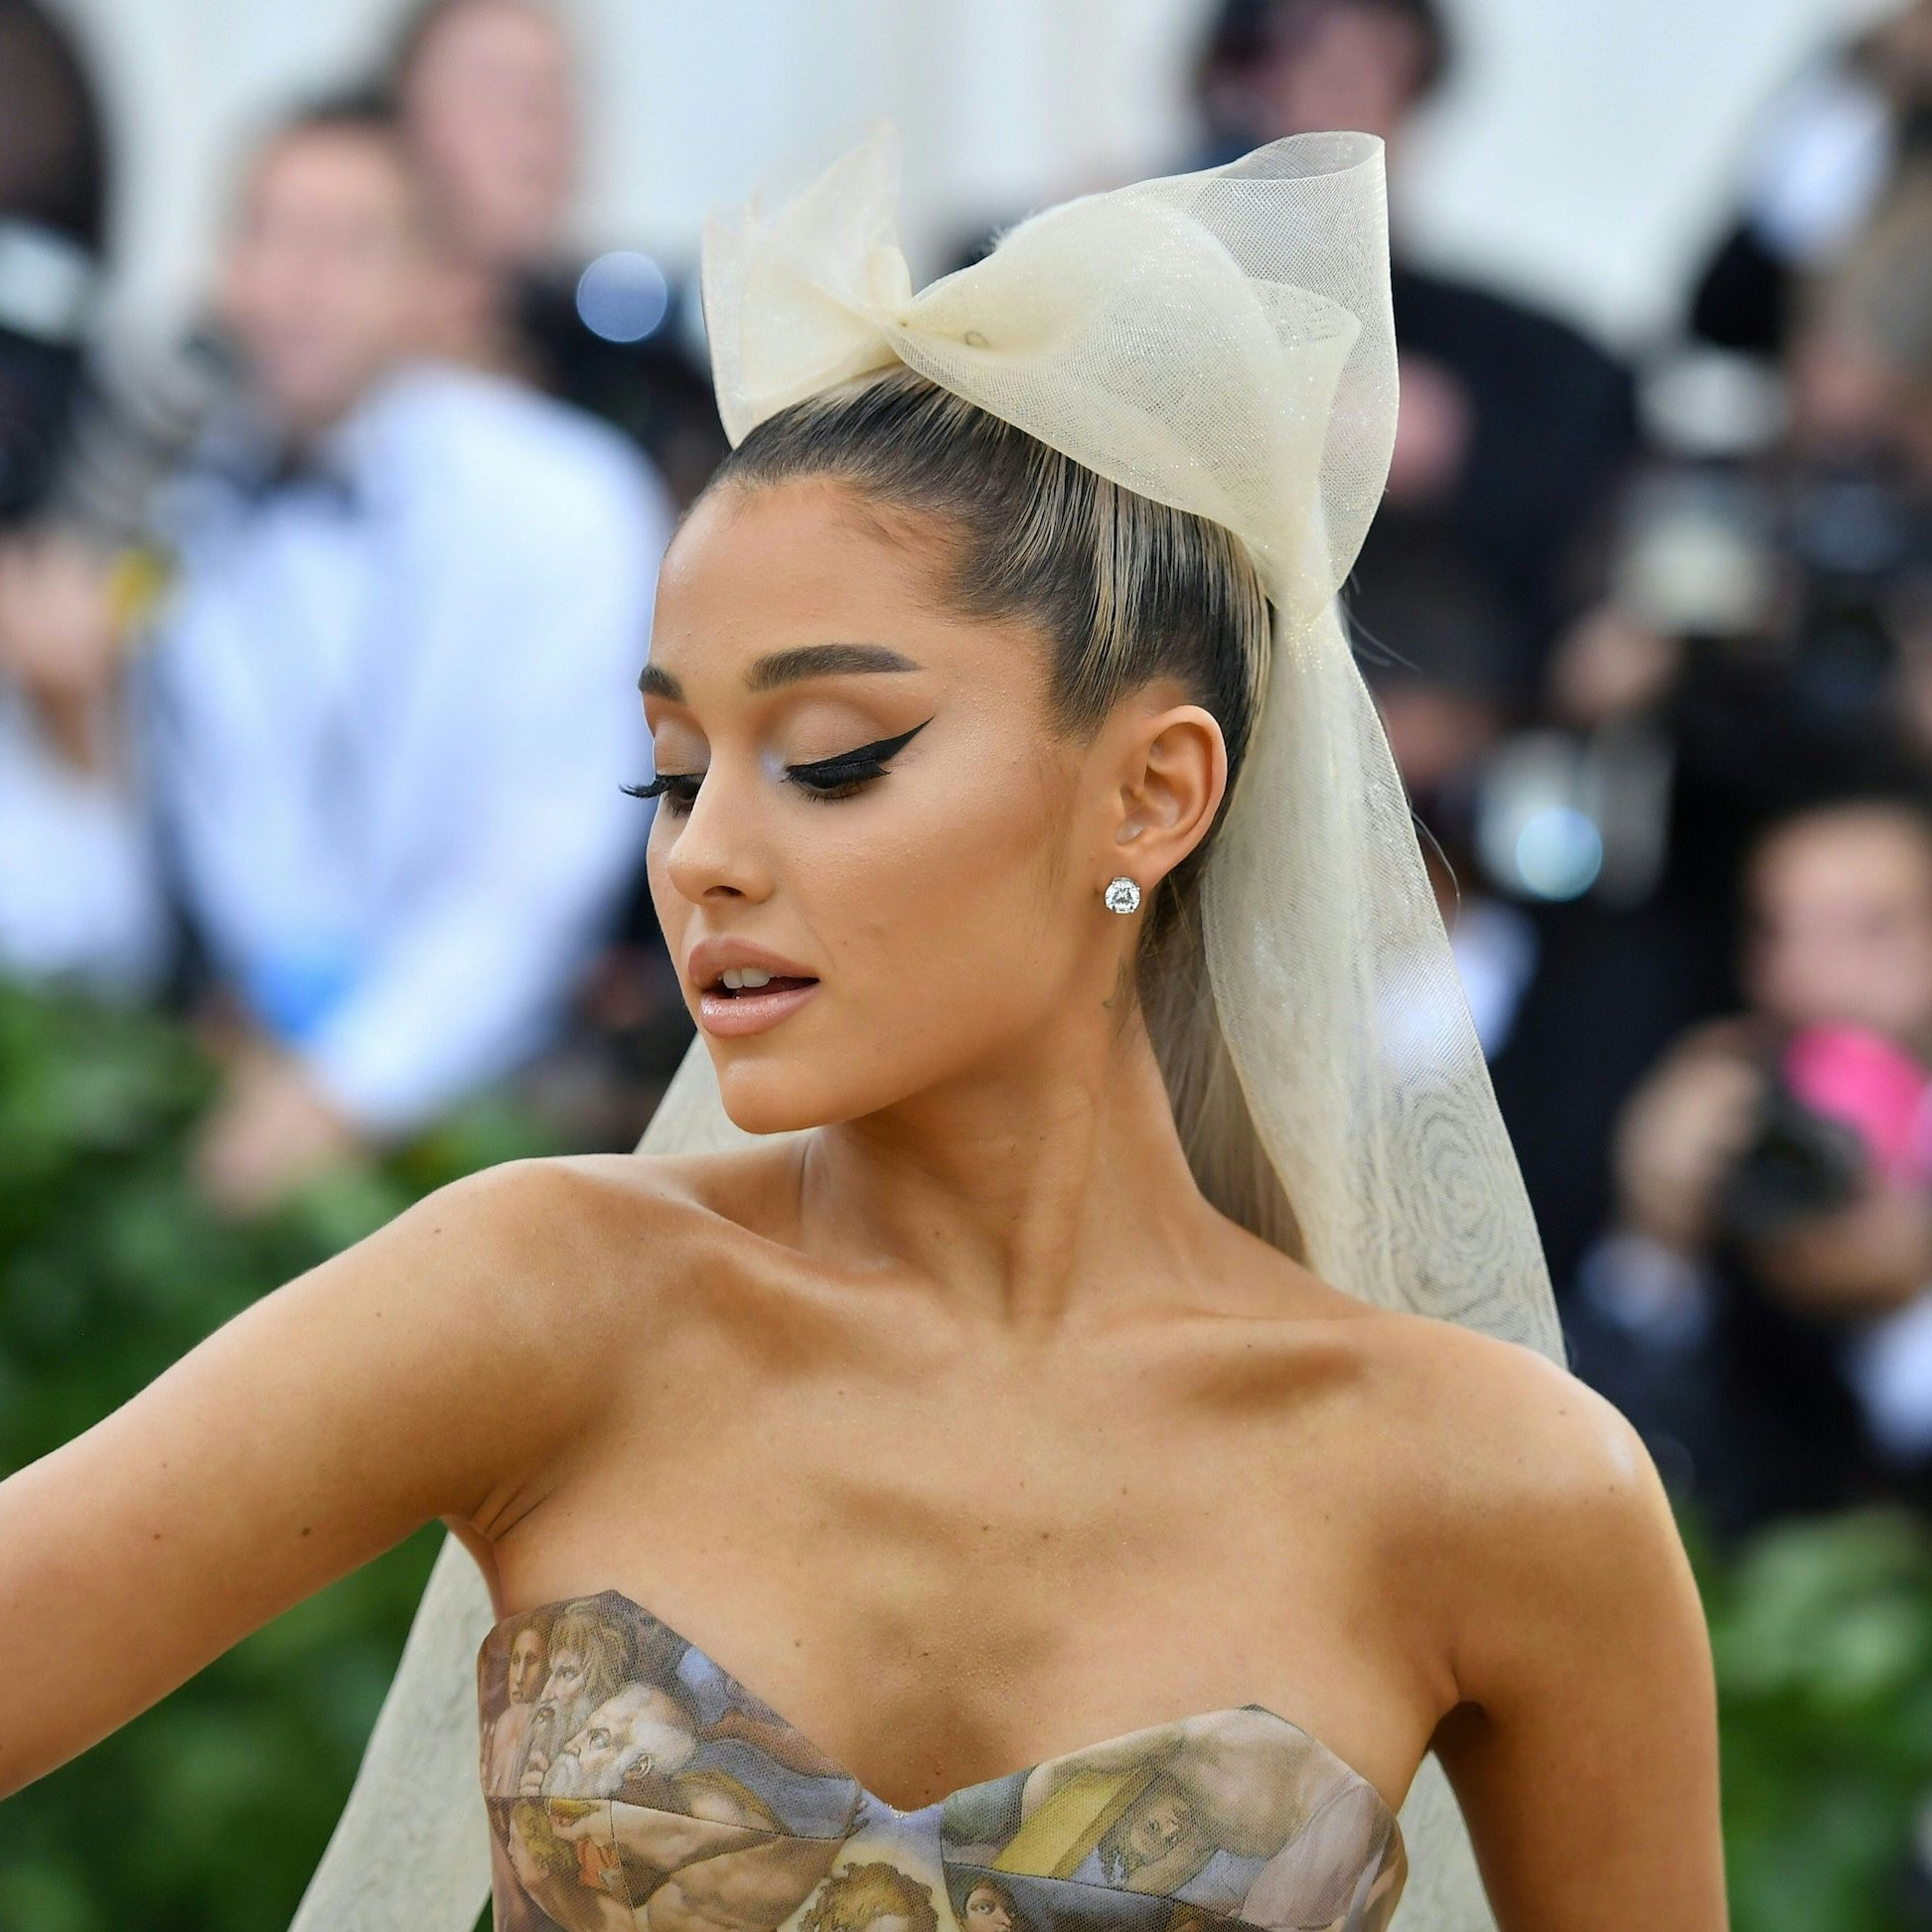 Ariana Grande Launching New Beauty Line 'God is a Woman.' Daily